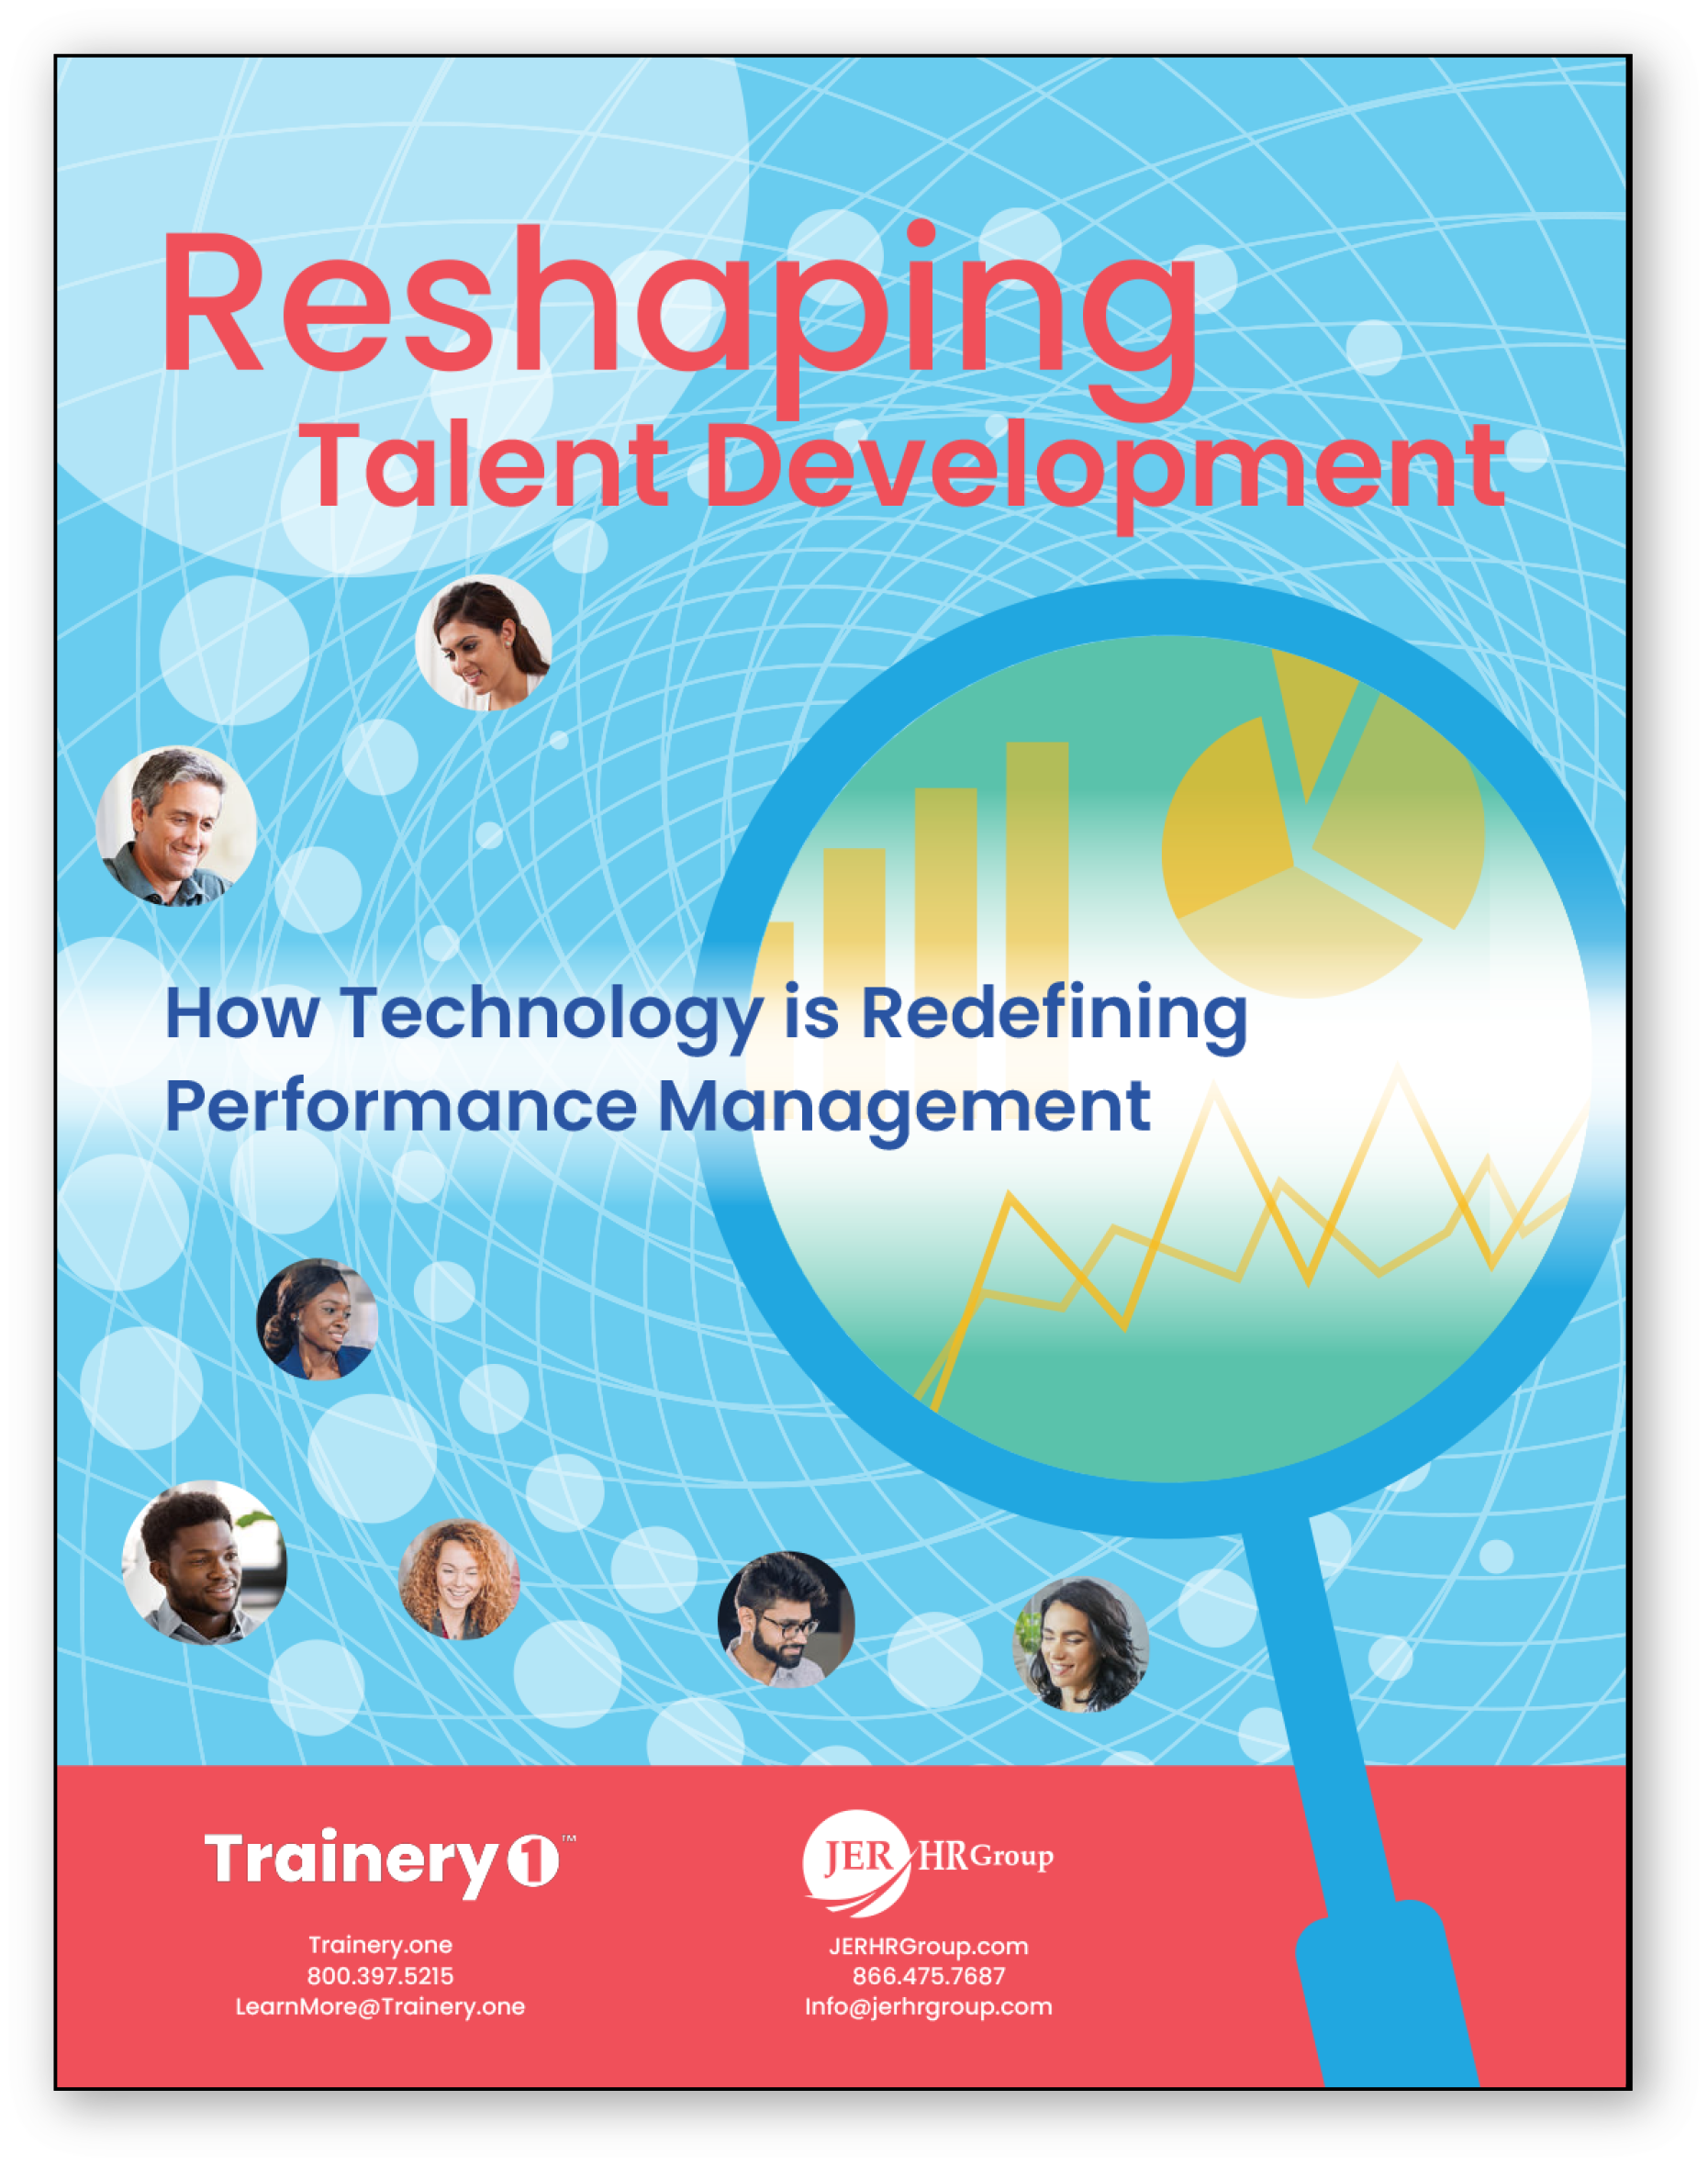 Reshaping Talent Development: How Technology is Redefining Performance Management